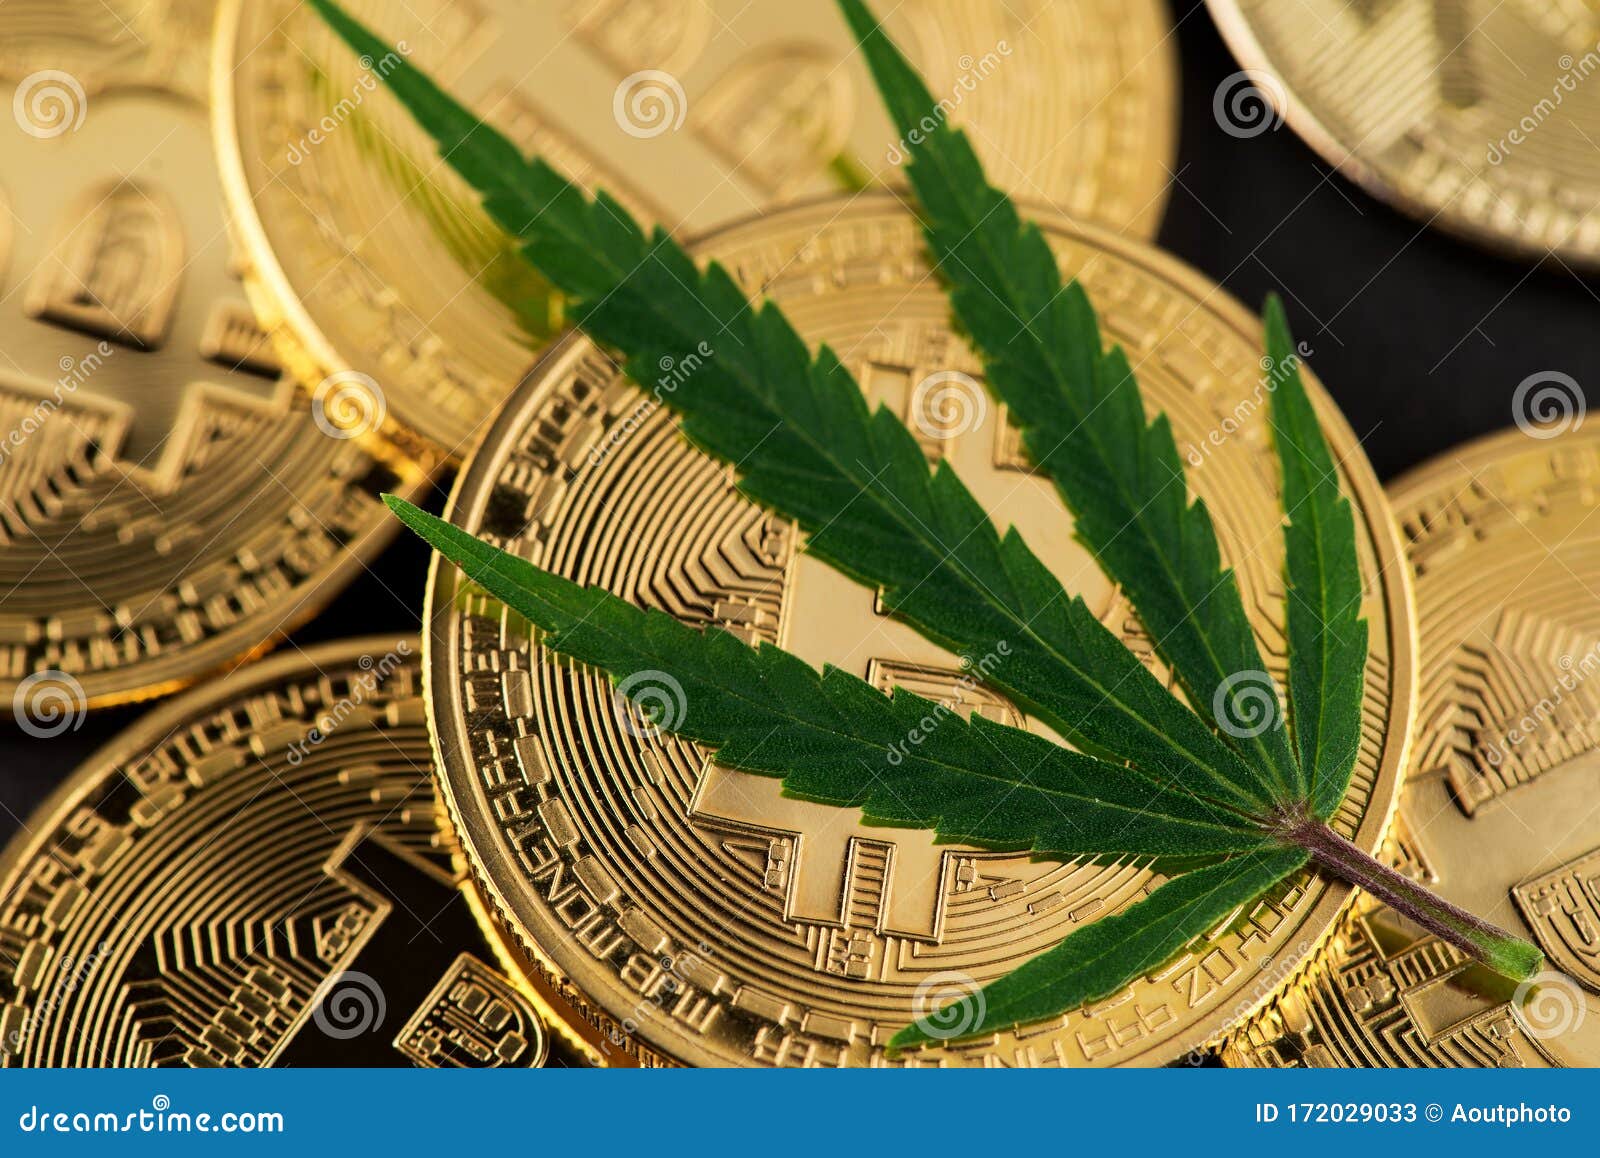 investing in bitcoin currency and cannabis